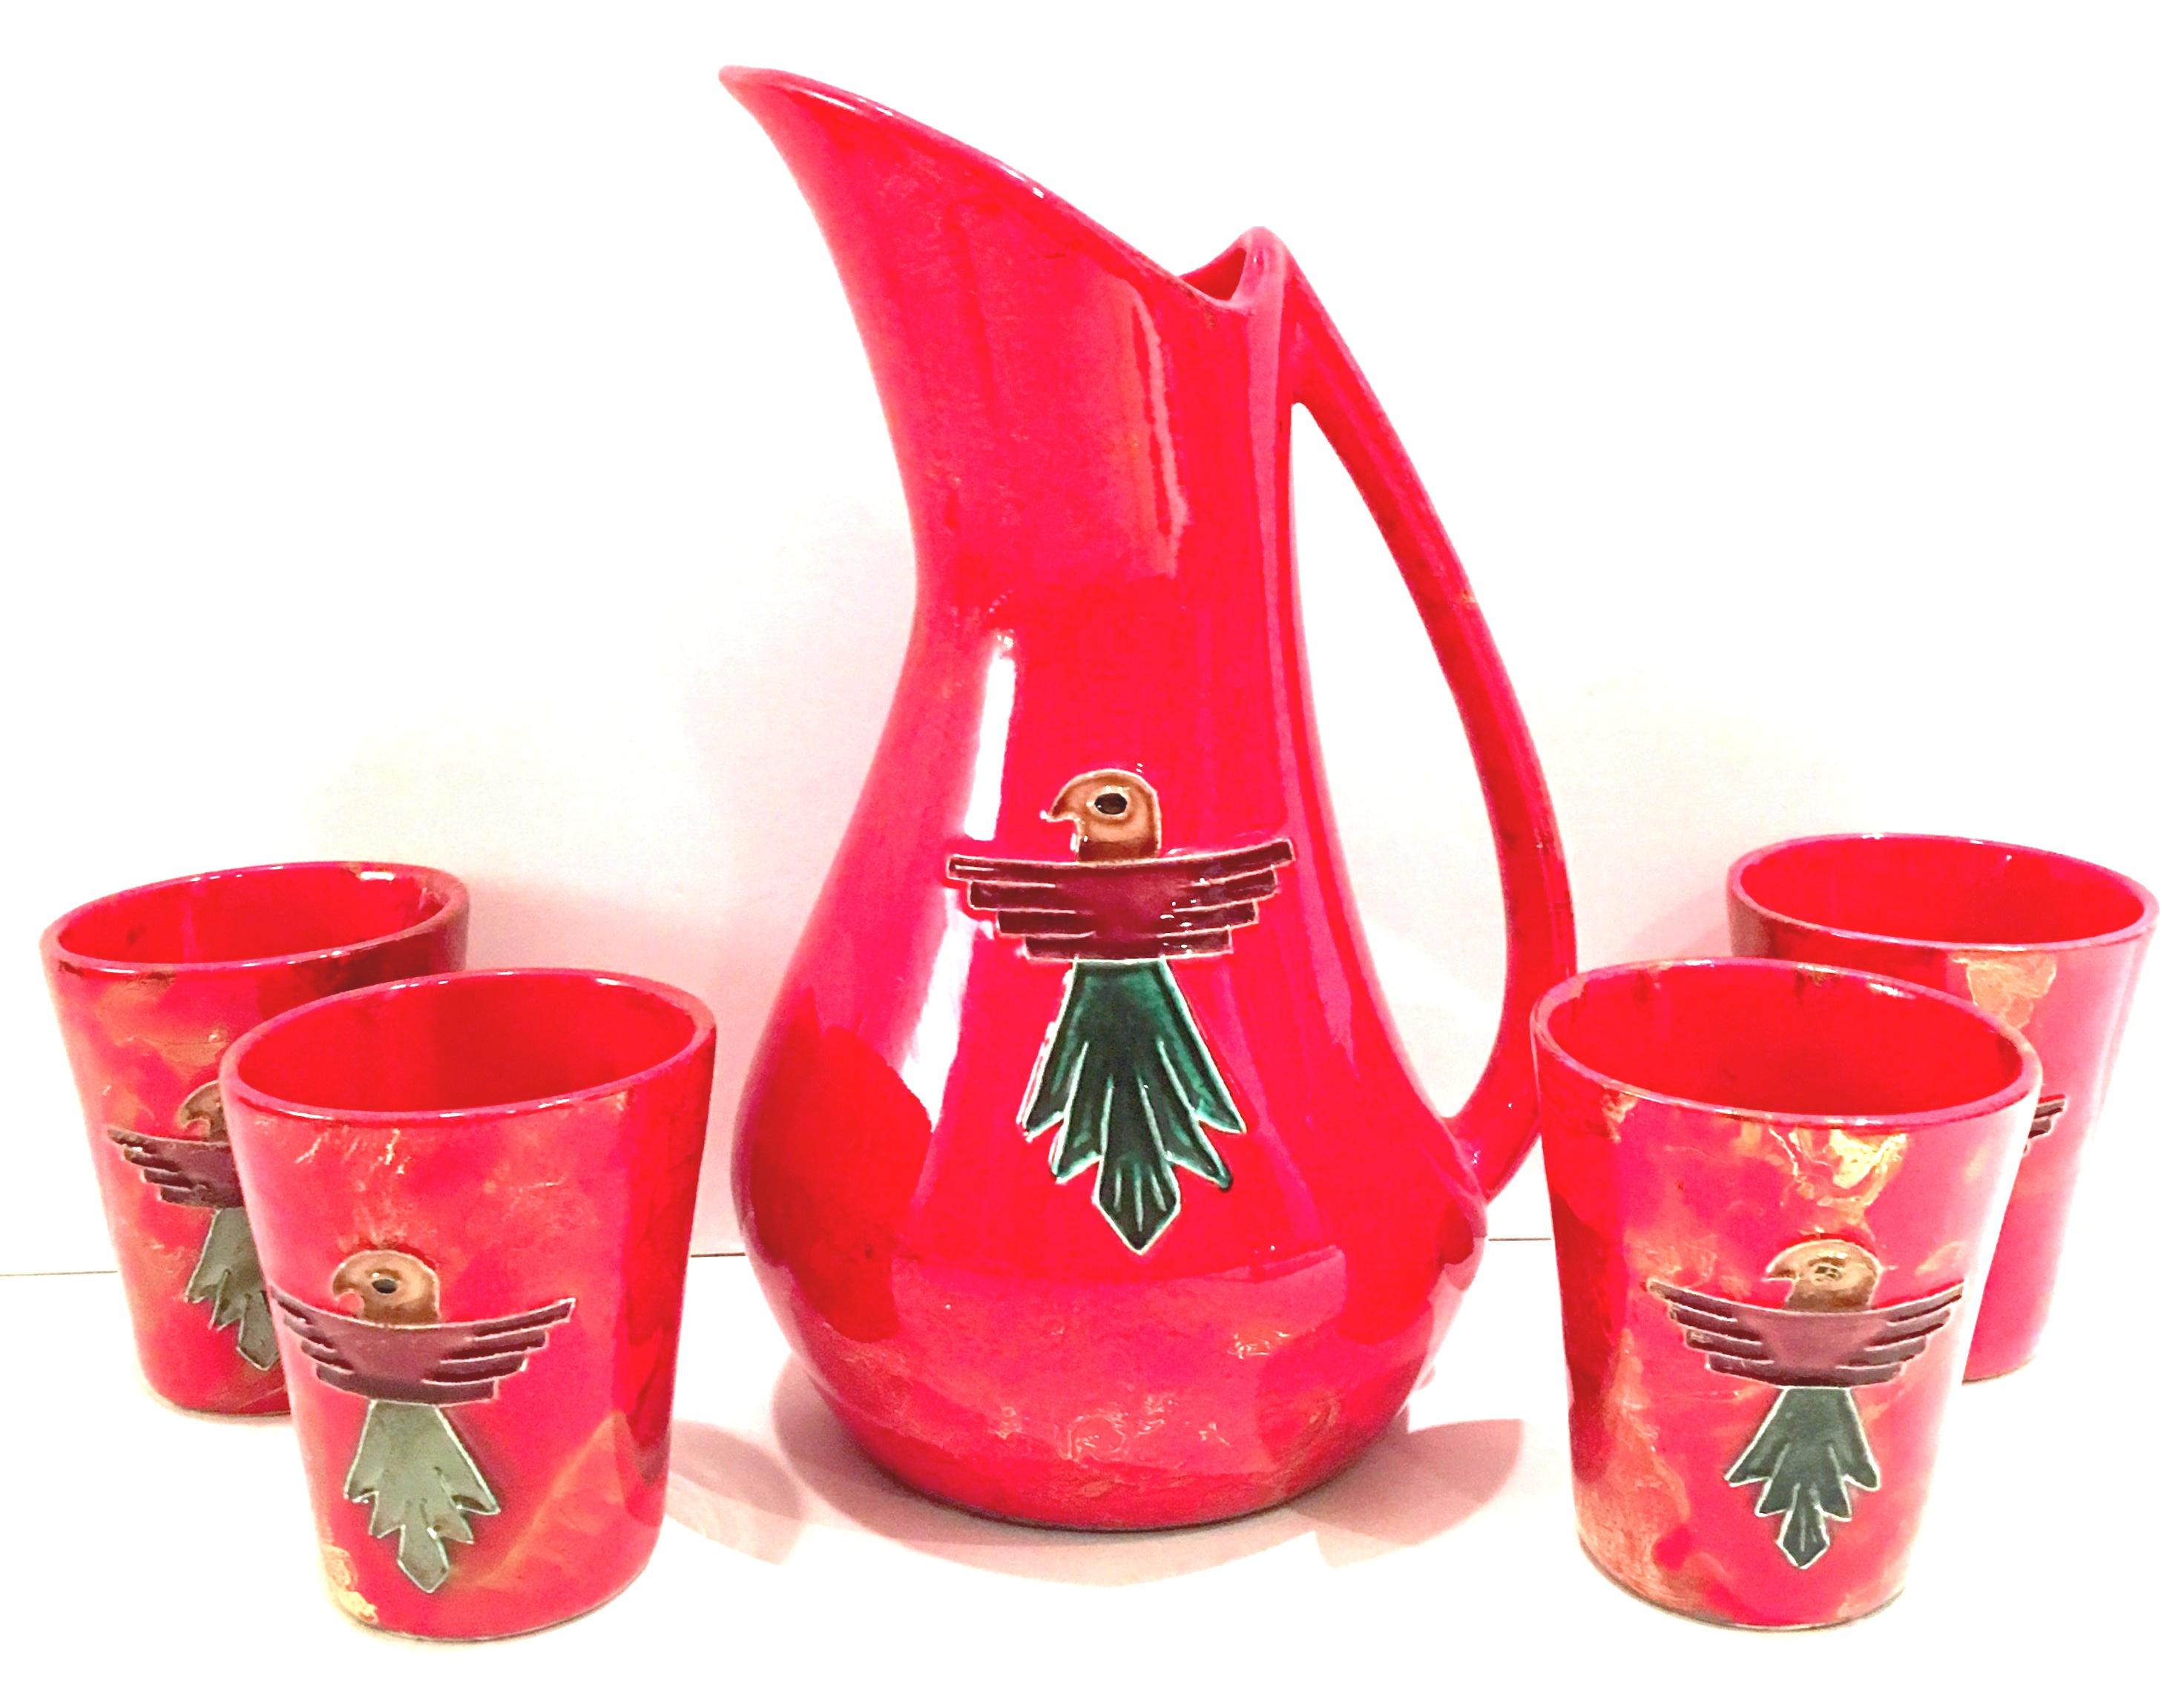 Mid-Century fire engine red with gold metallic detail and reposse thunderbird hand-painted detail five piece drinks set. Set includes handled pitcher and four tumblers. Tumblers measure, 4